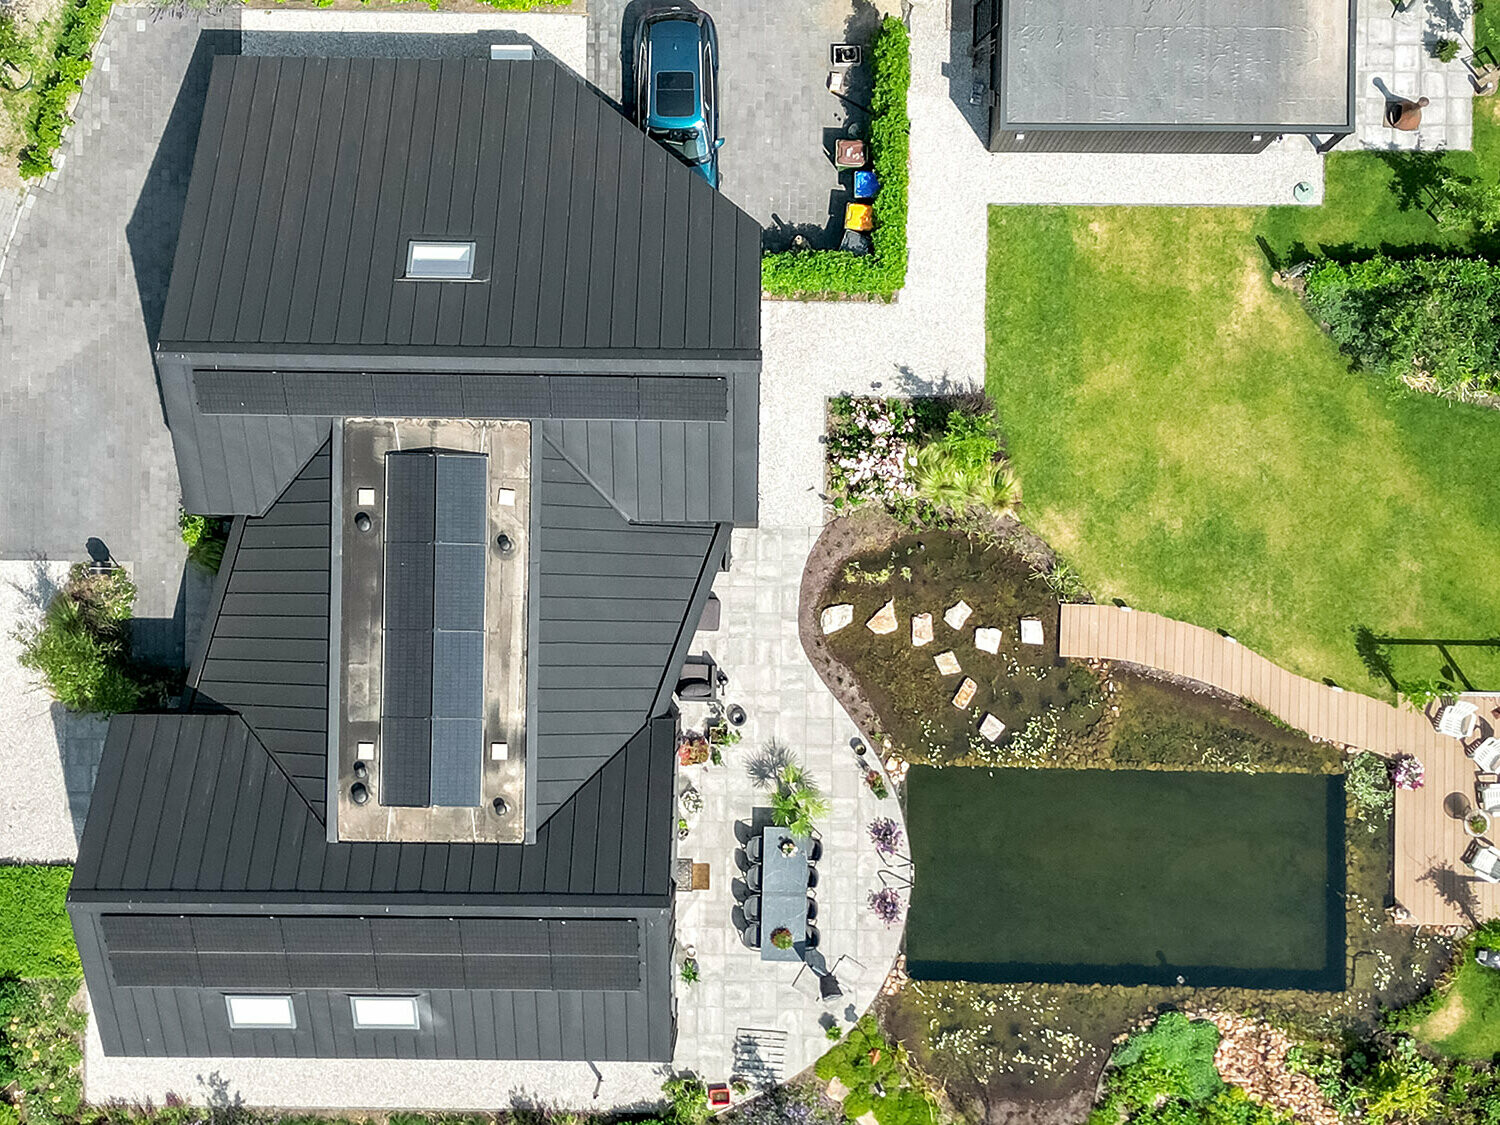 Aerial view of a modern detached house with a complex roof system made of black Prefalz, solar panels and several dormers. The property has a well-kept garden with lawns, a large pond, a wooden footbridge and a seating area. Paved paths and a driveway complete the picture of the neatly landscaped grounds surrounding the house.